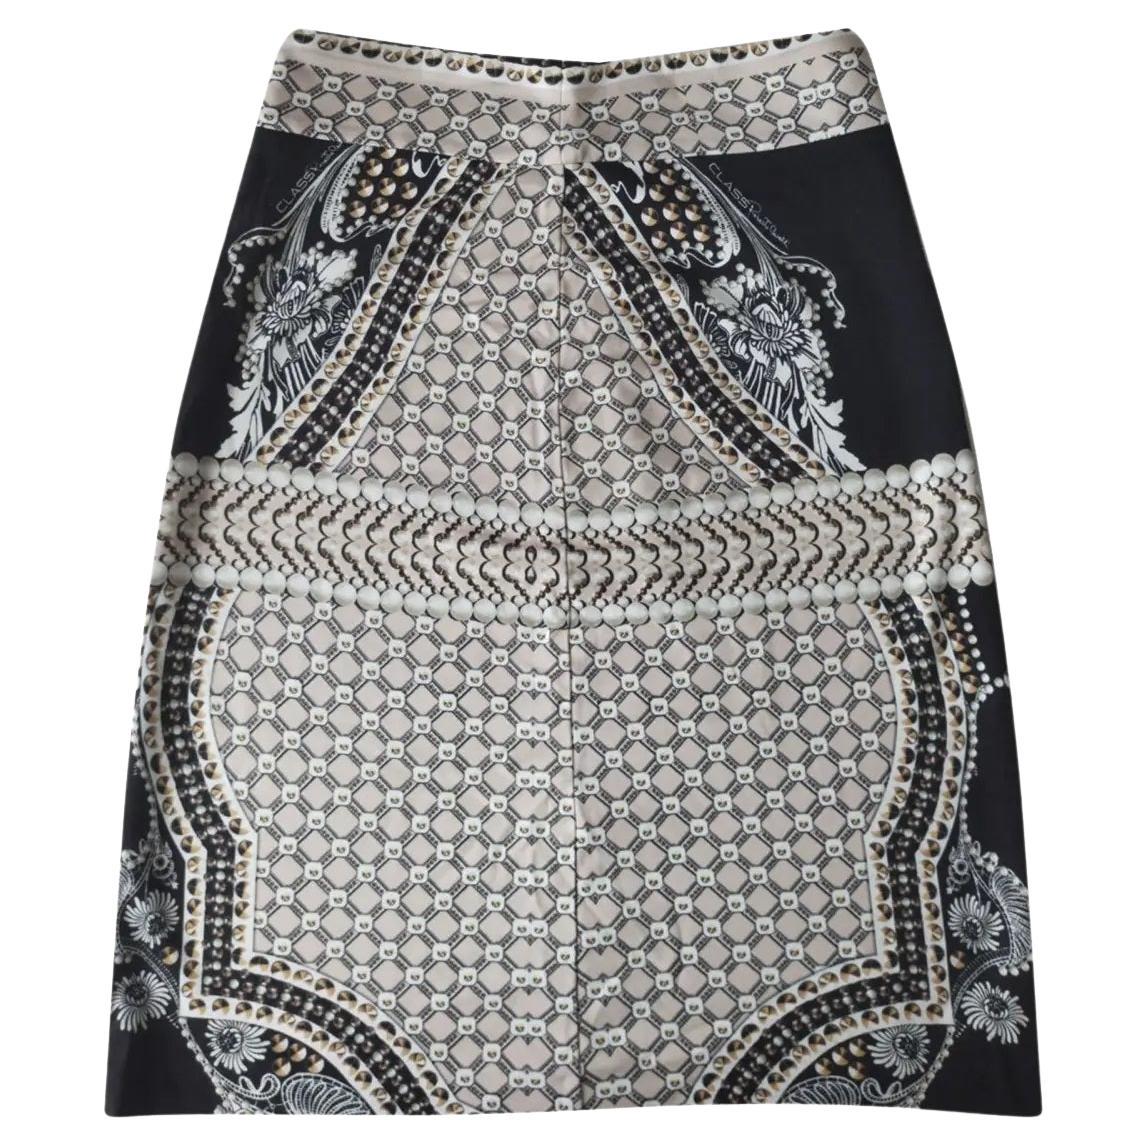 The skirt from Cavalli Class (size 48) is made of viscose.